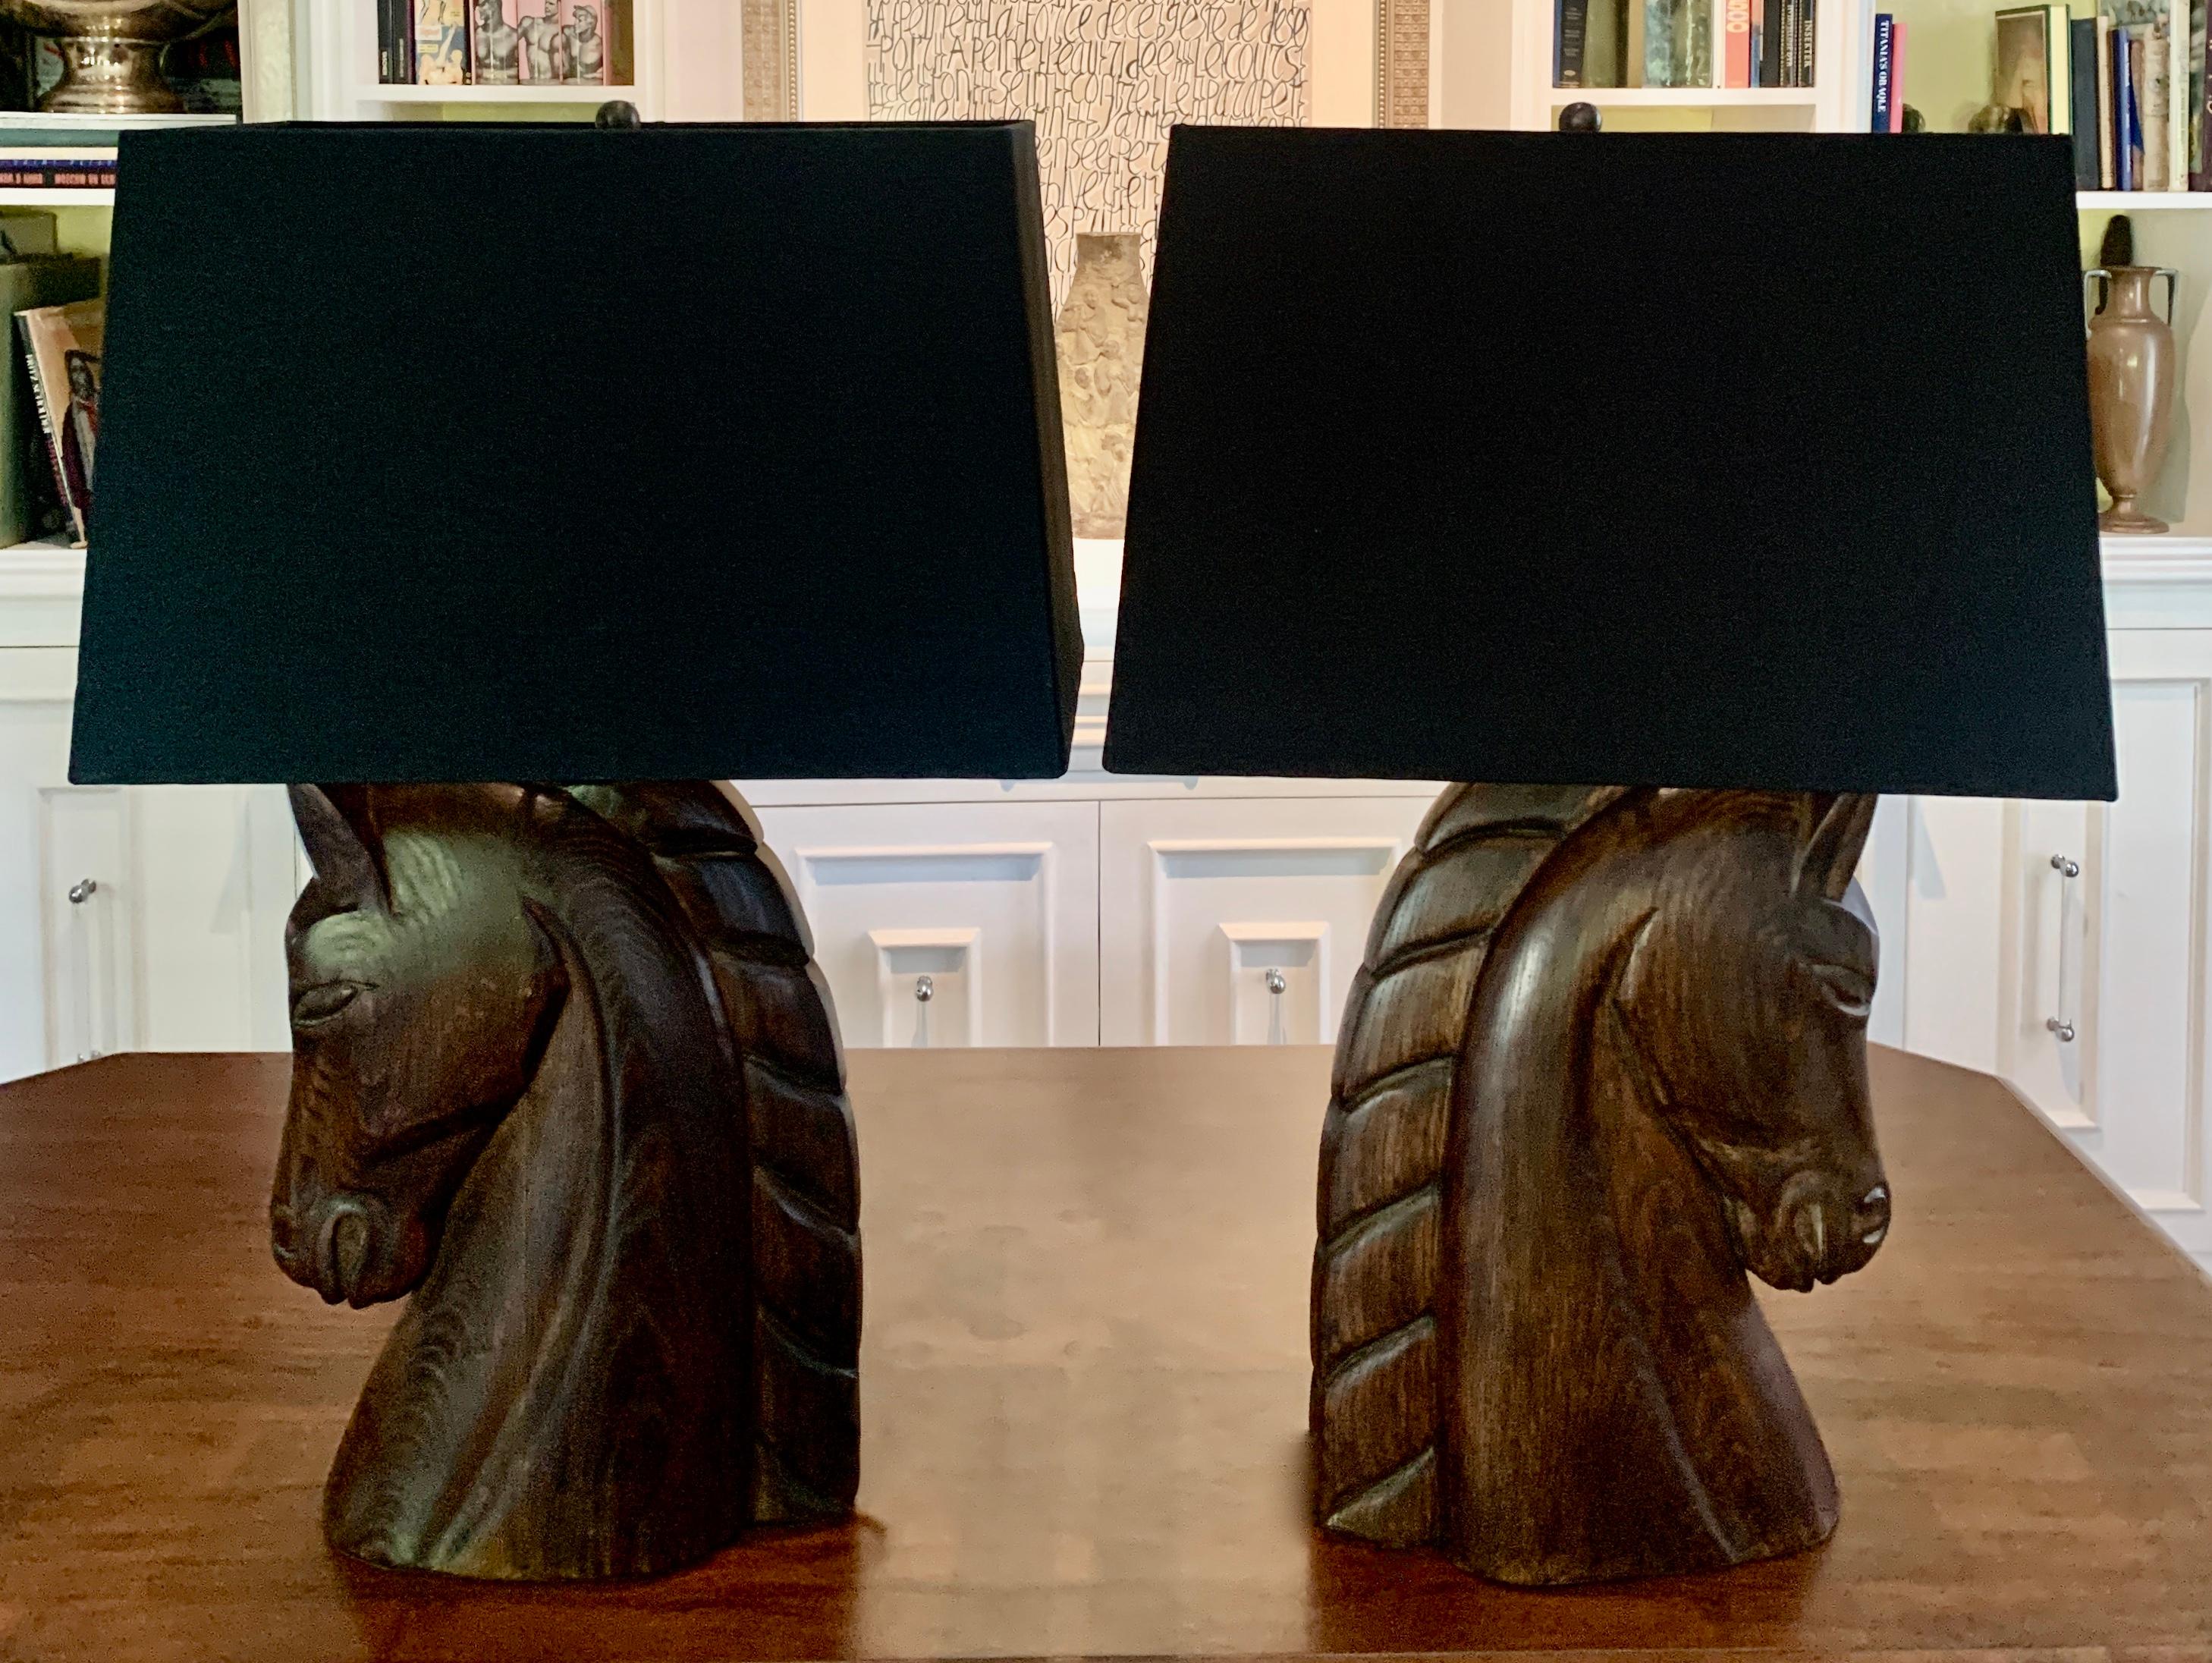 Pair of William Billy Haines carved horse head lamps, a stunning pair for the modern or traditional home and especially those who enjoy equestrian - a bold statement.

Firmly attributed pair in dark cerused oak finish with black silk shades